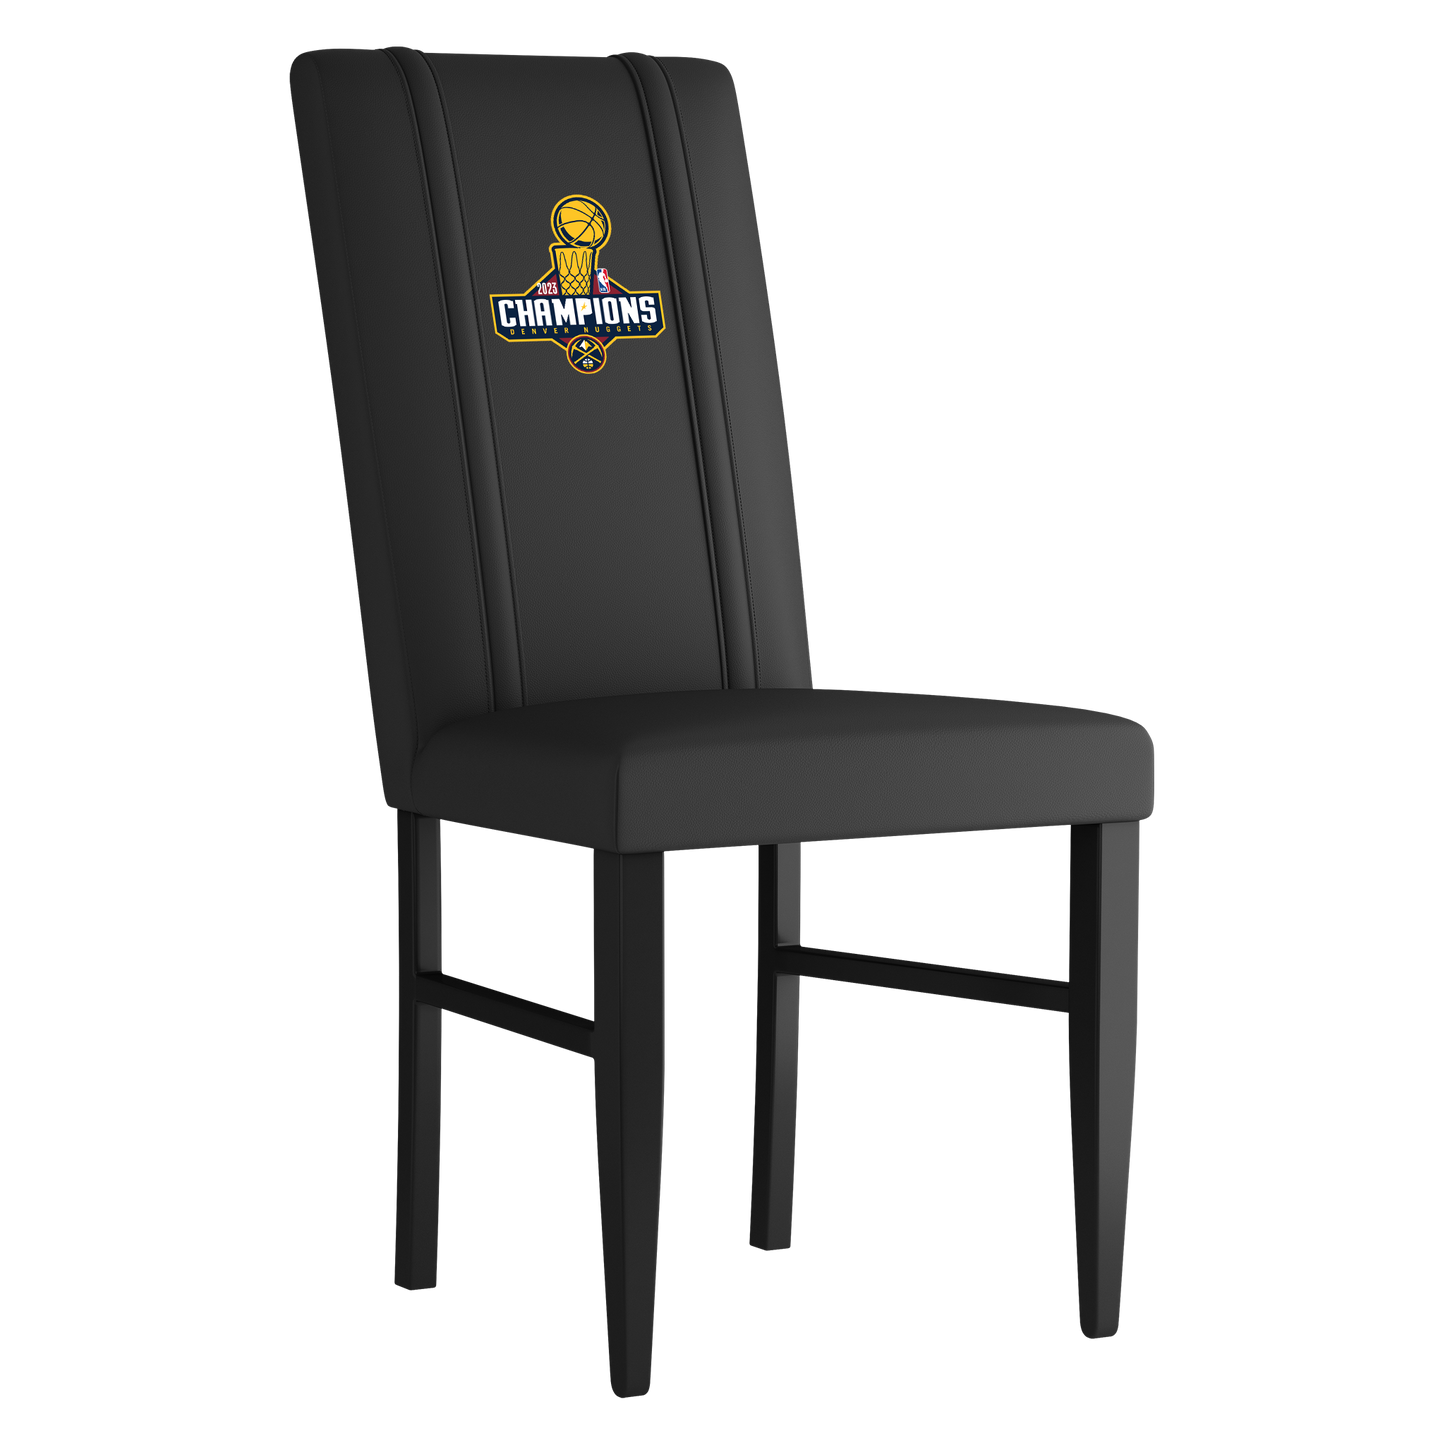 Side Chair 2000 with Denver Nuggets 2023 Championship Logo Set of 2